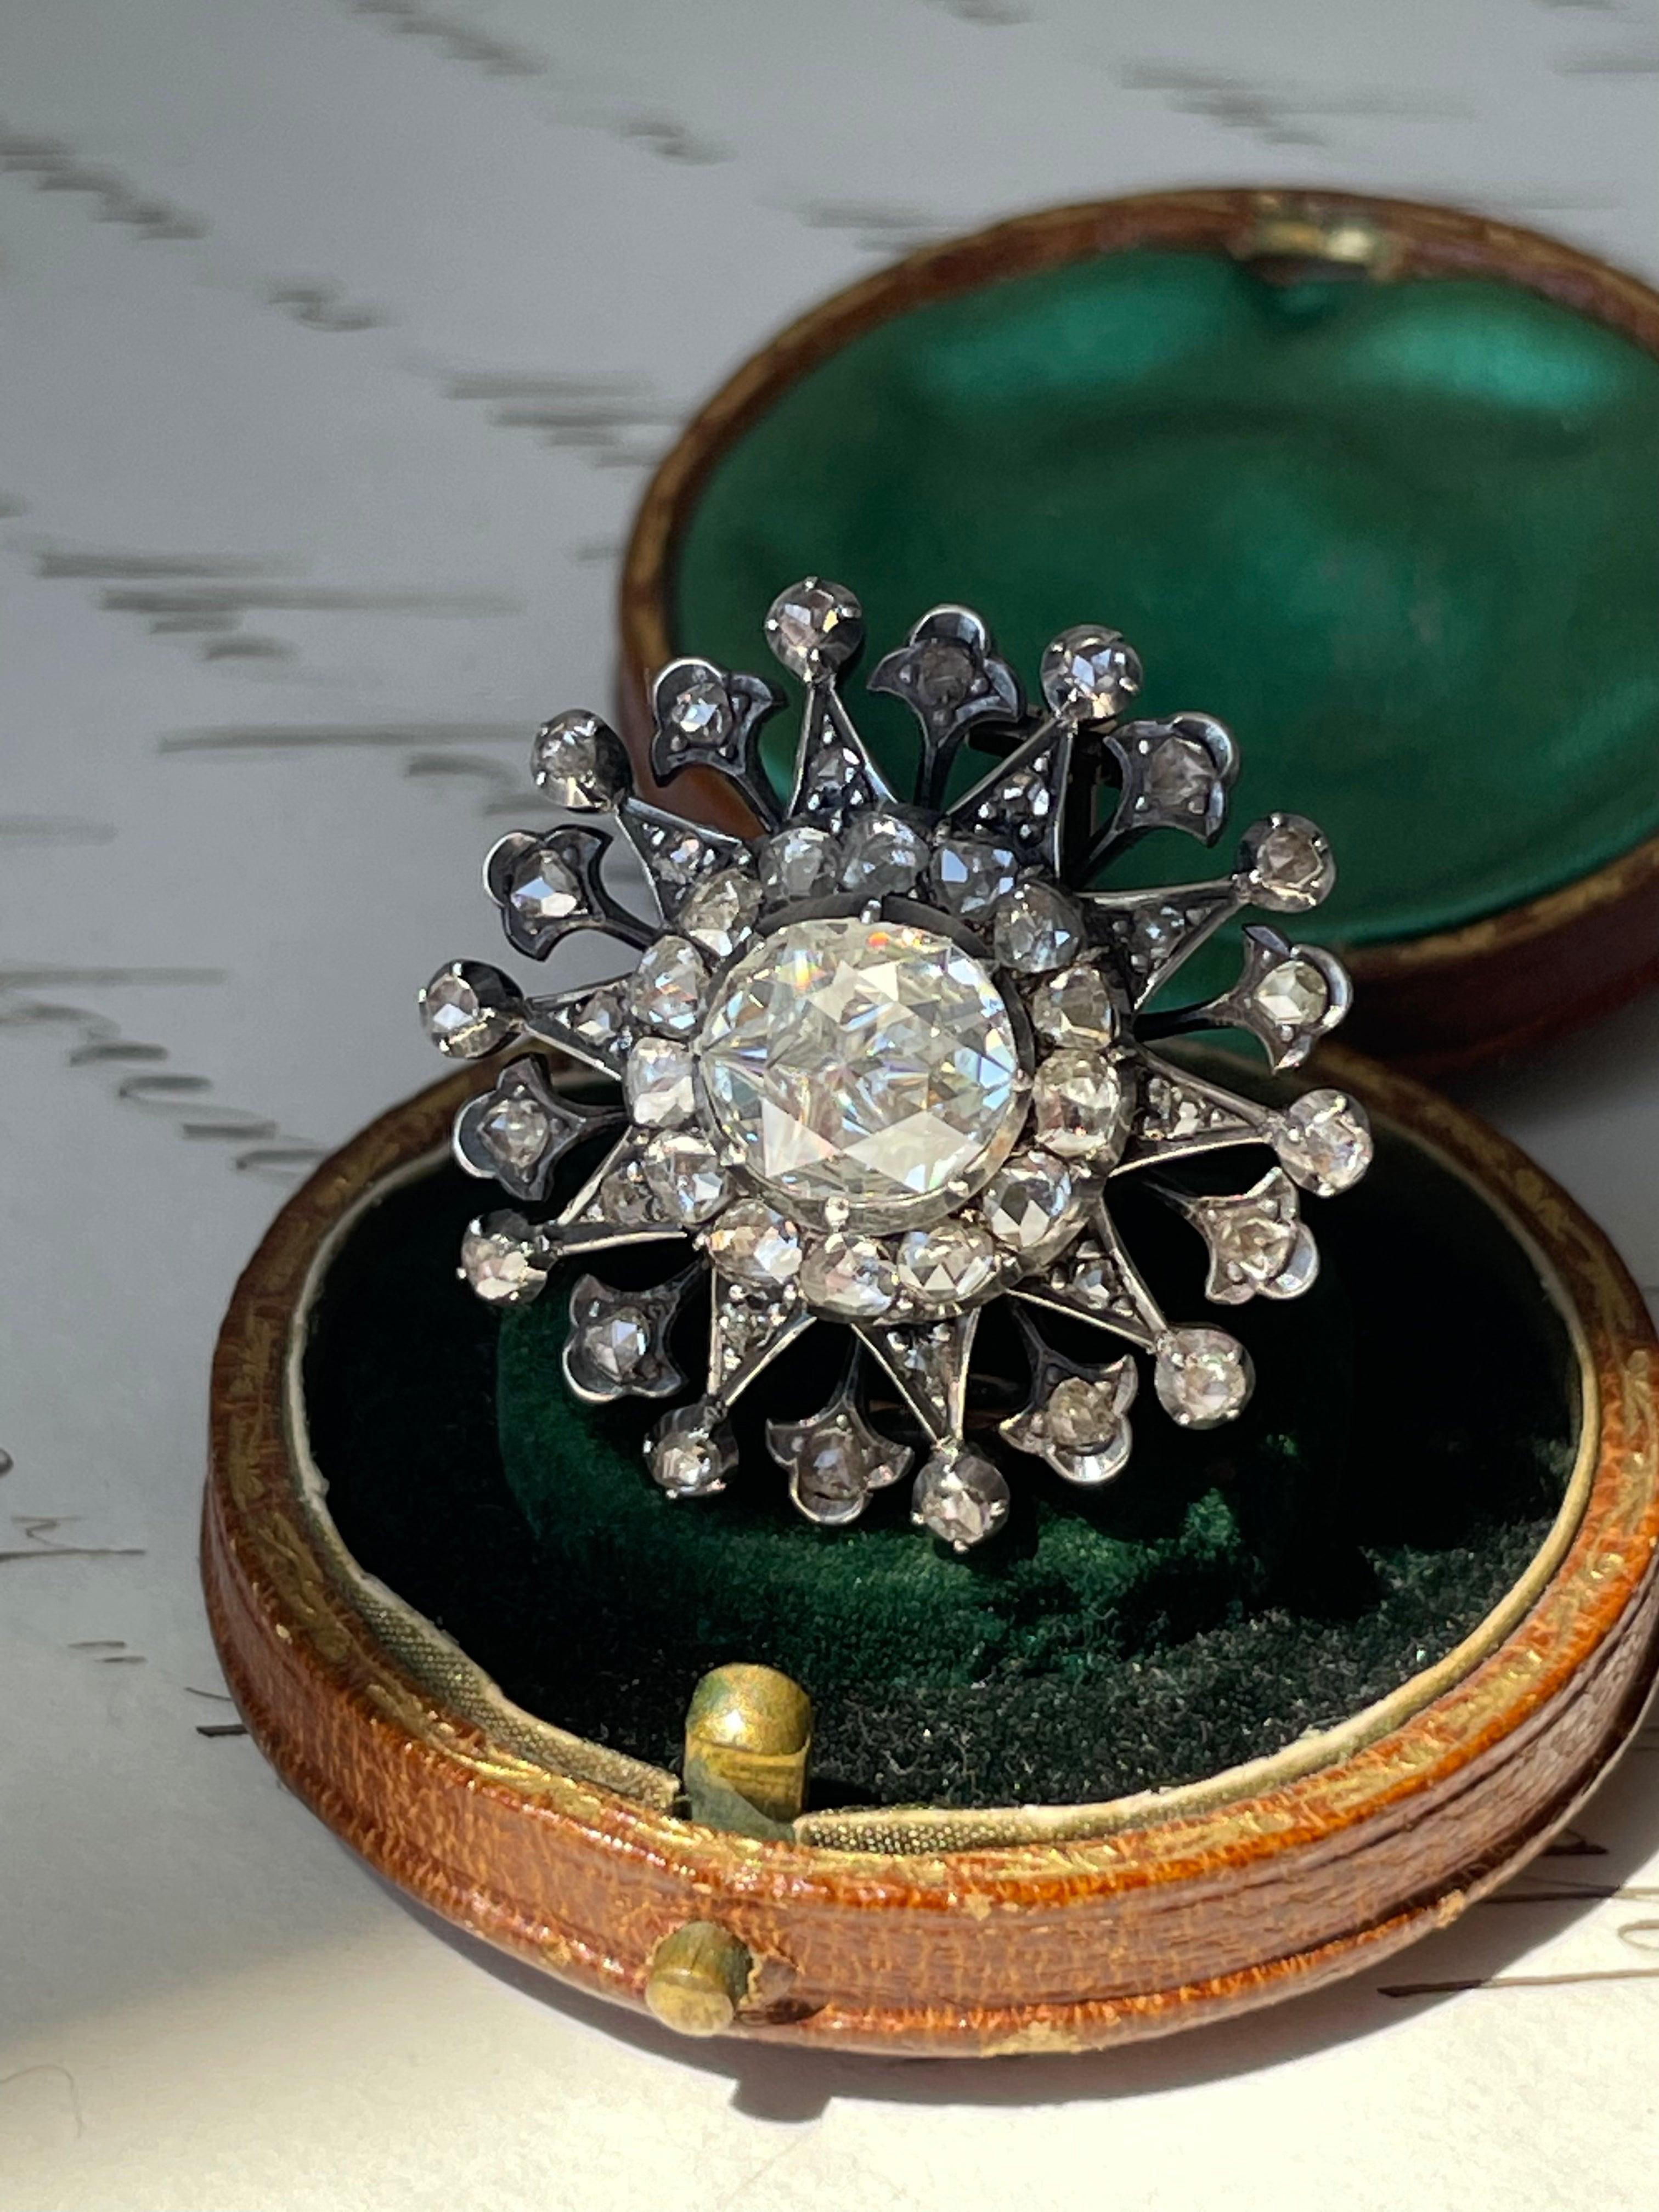 Antique 2 Carat Rose Cut Diamond Brooch c1850 In Good Condition For Sale In Hummelstown, PA